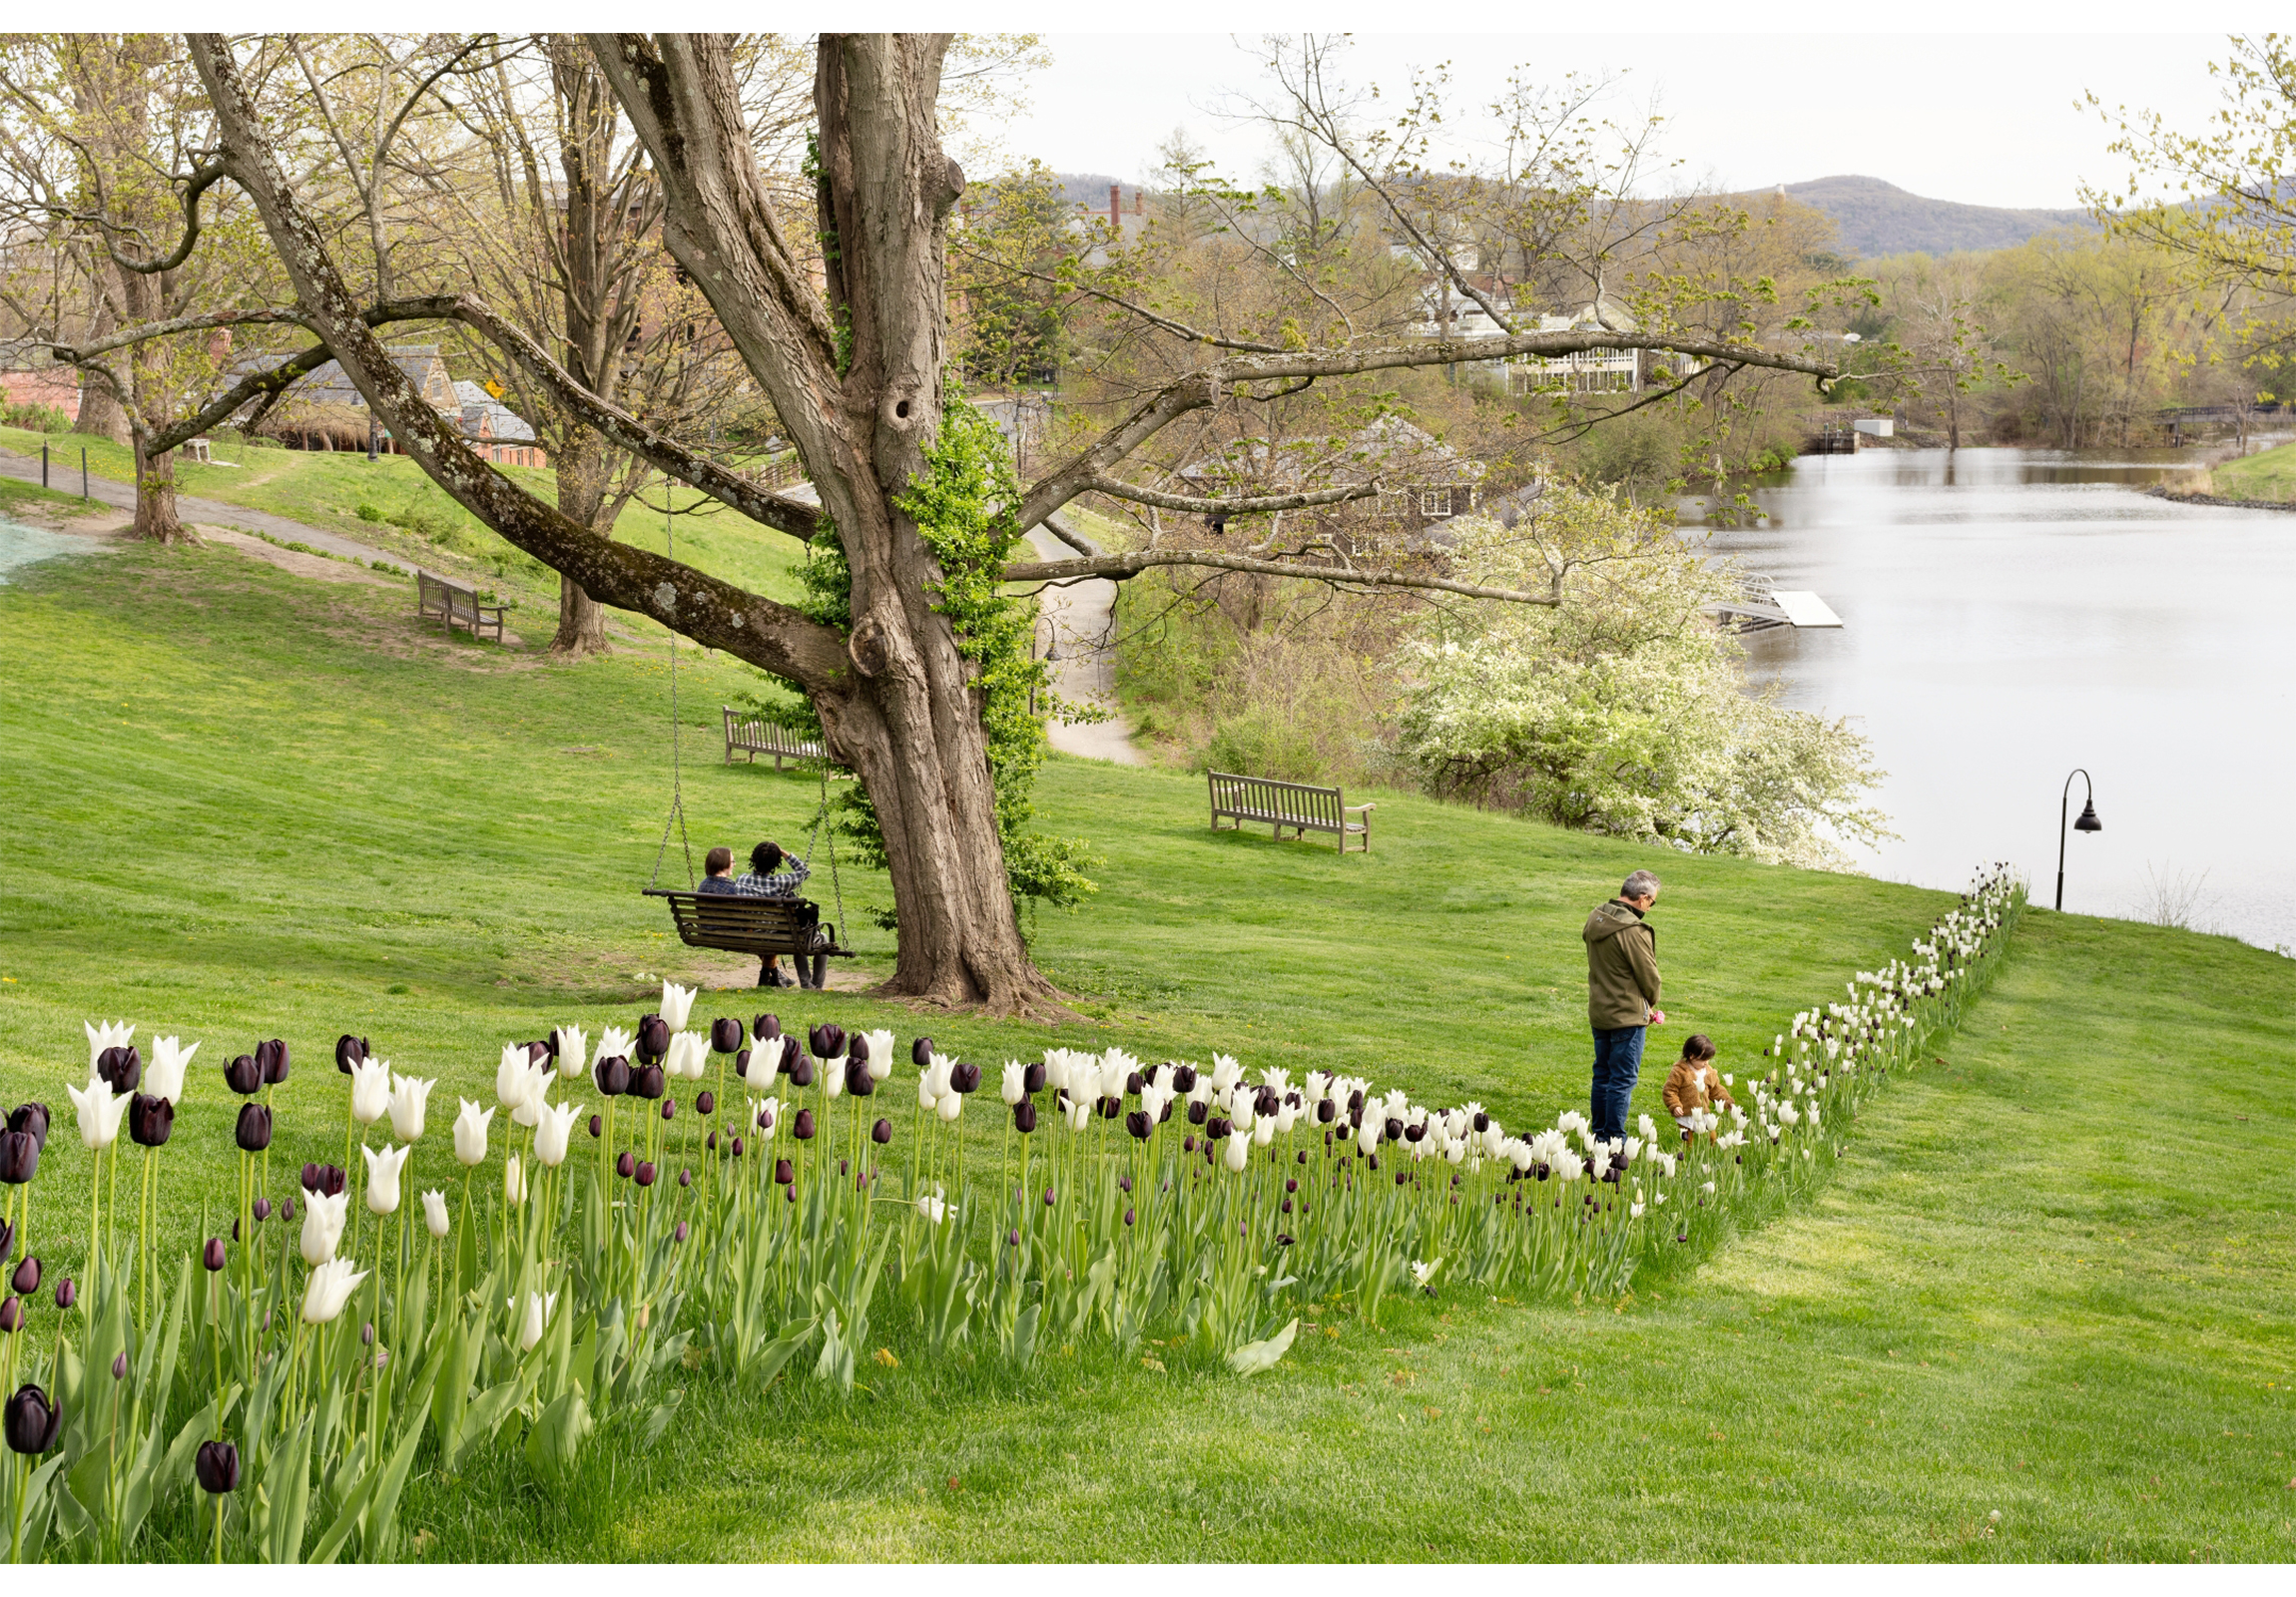 Line of black and white tulips climbing hillside with tree on left and pond in background-with tw adults and child people in view